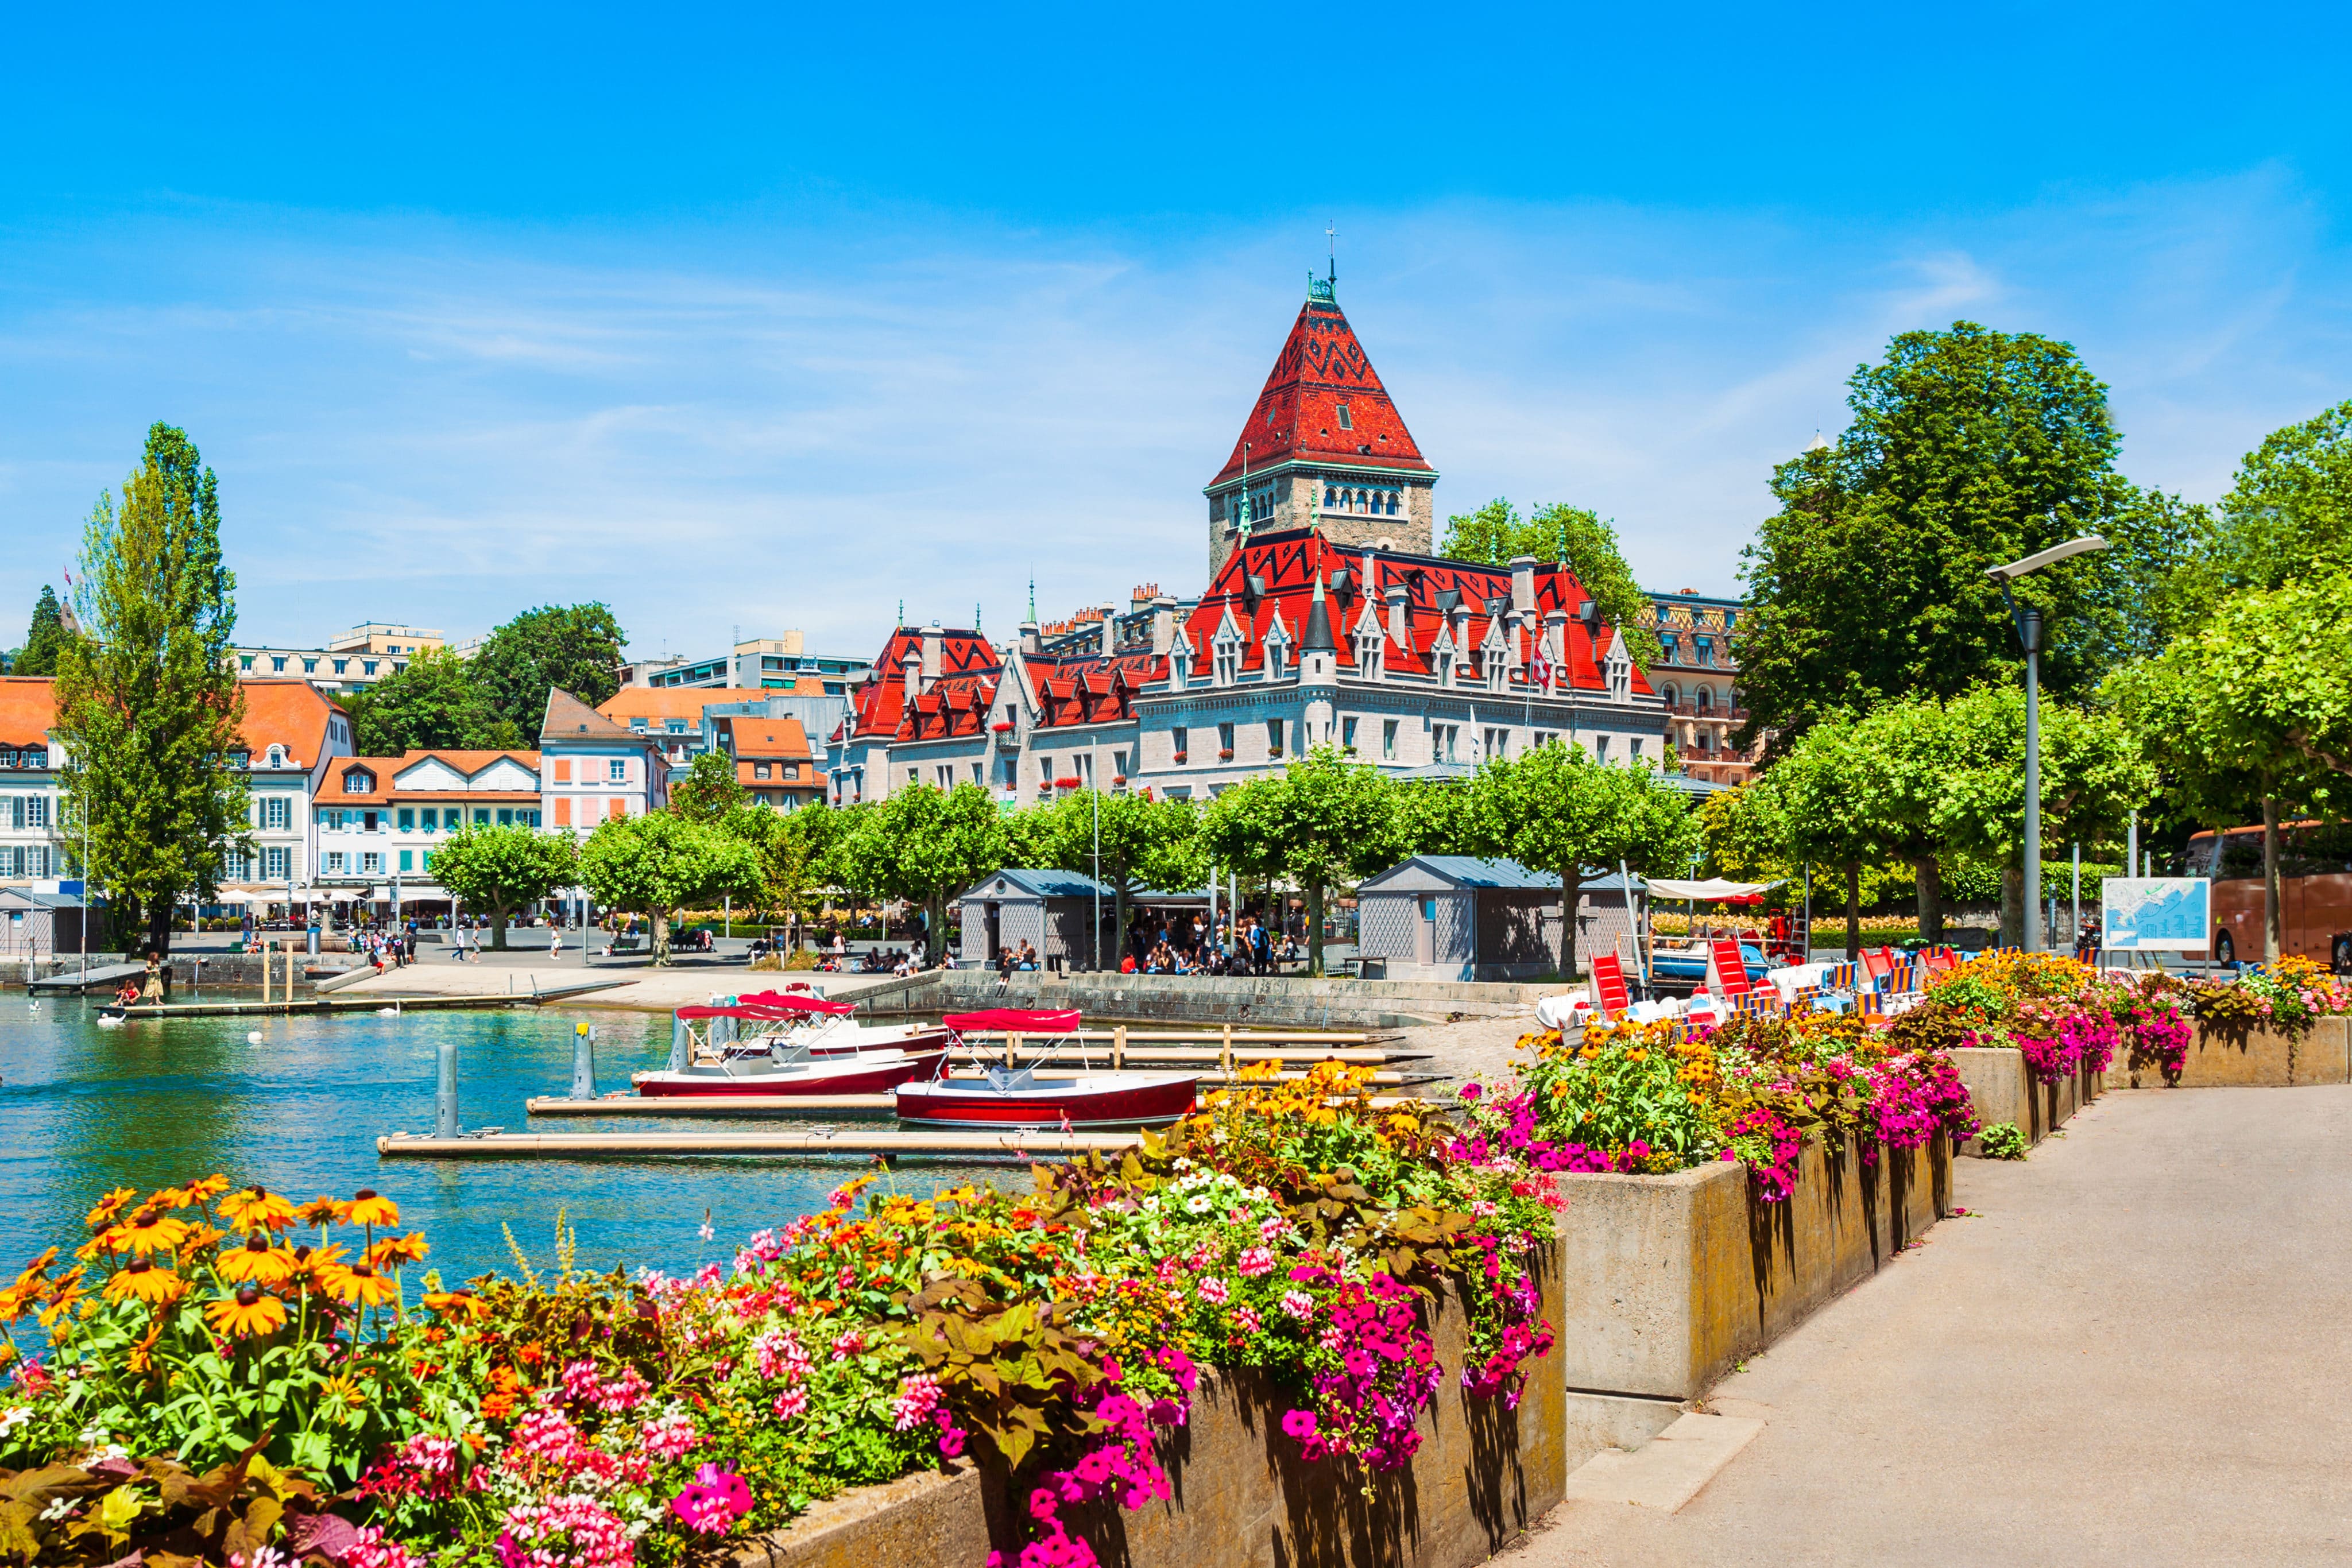 Swiss City of Lausanne to Launch Recreational Cannabis Trial This Fall